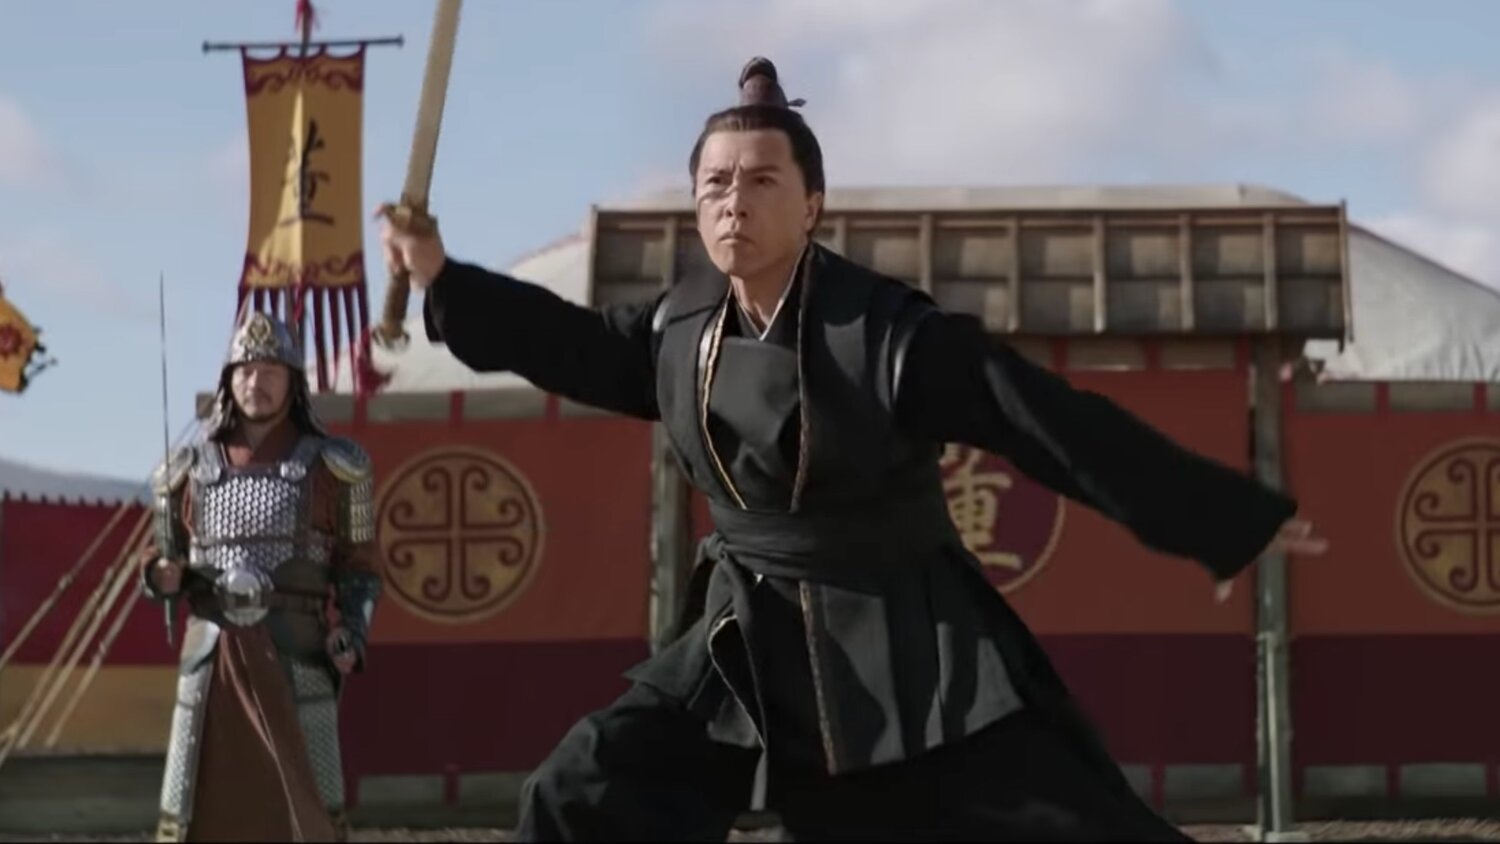 Mulan facts about the weapons, locations & costumes